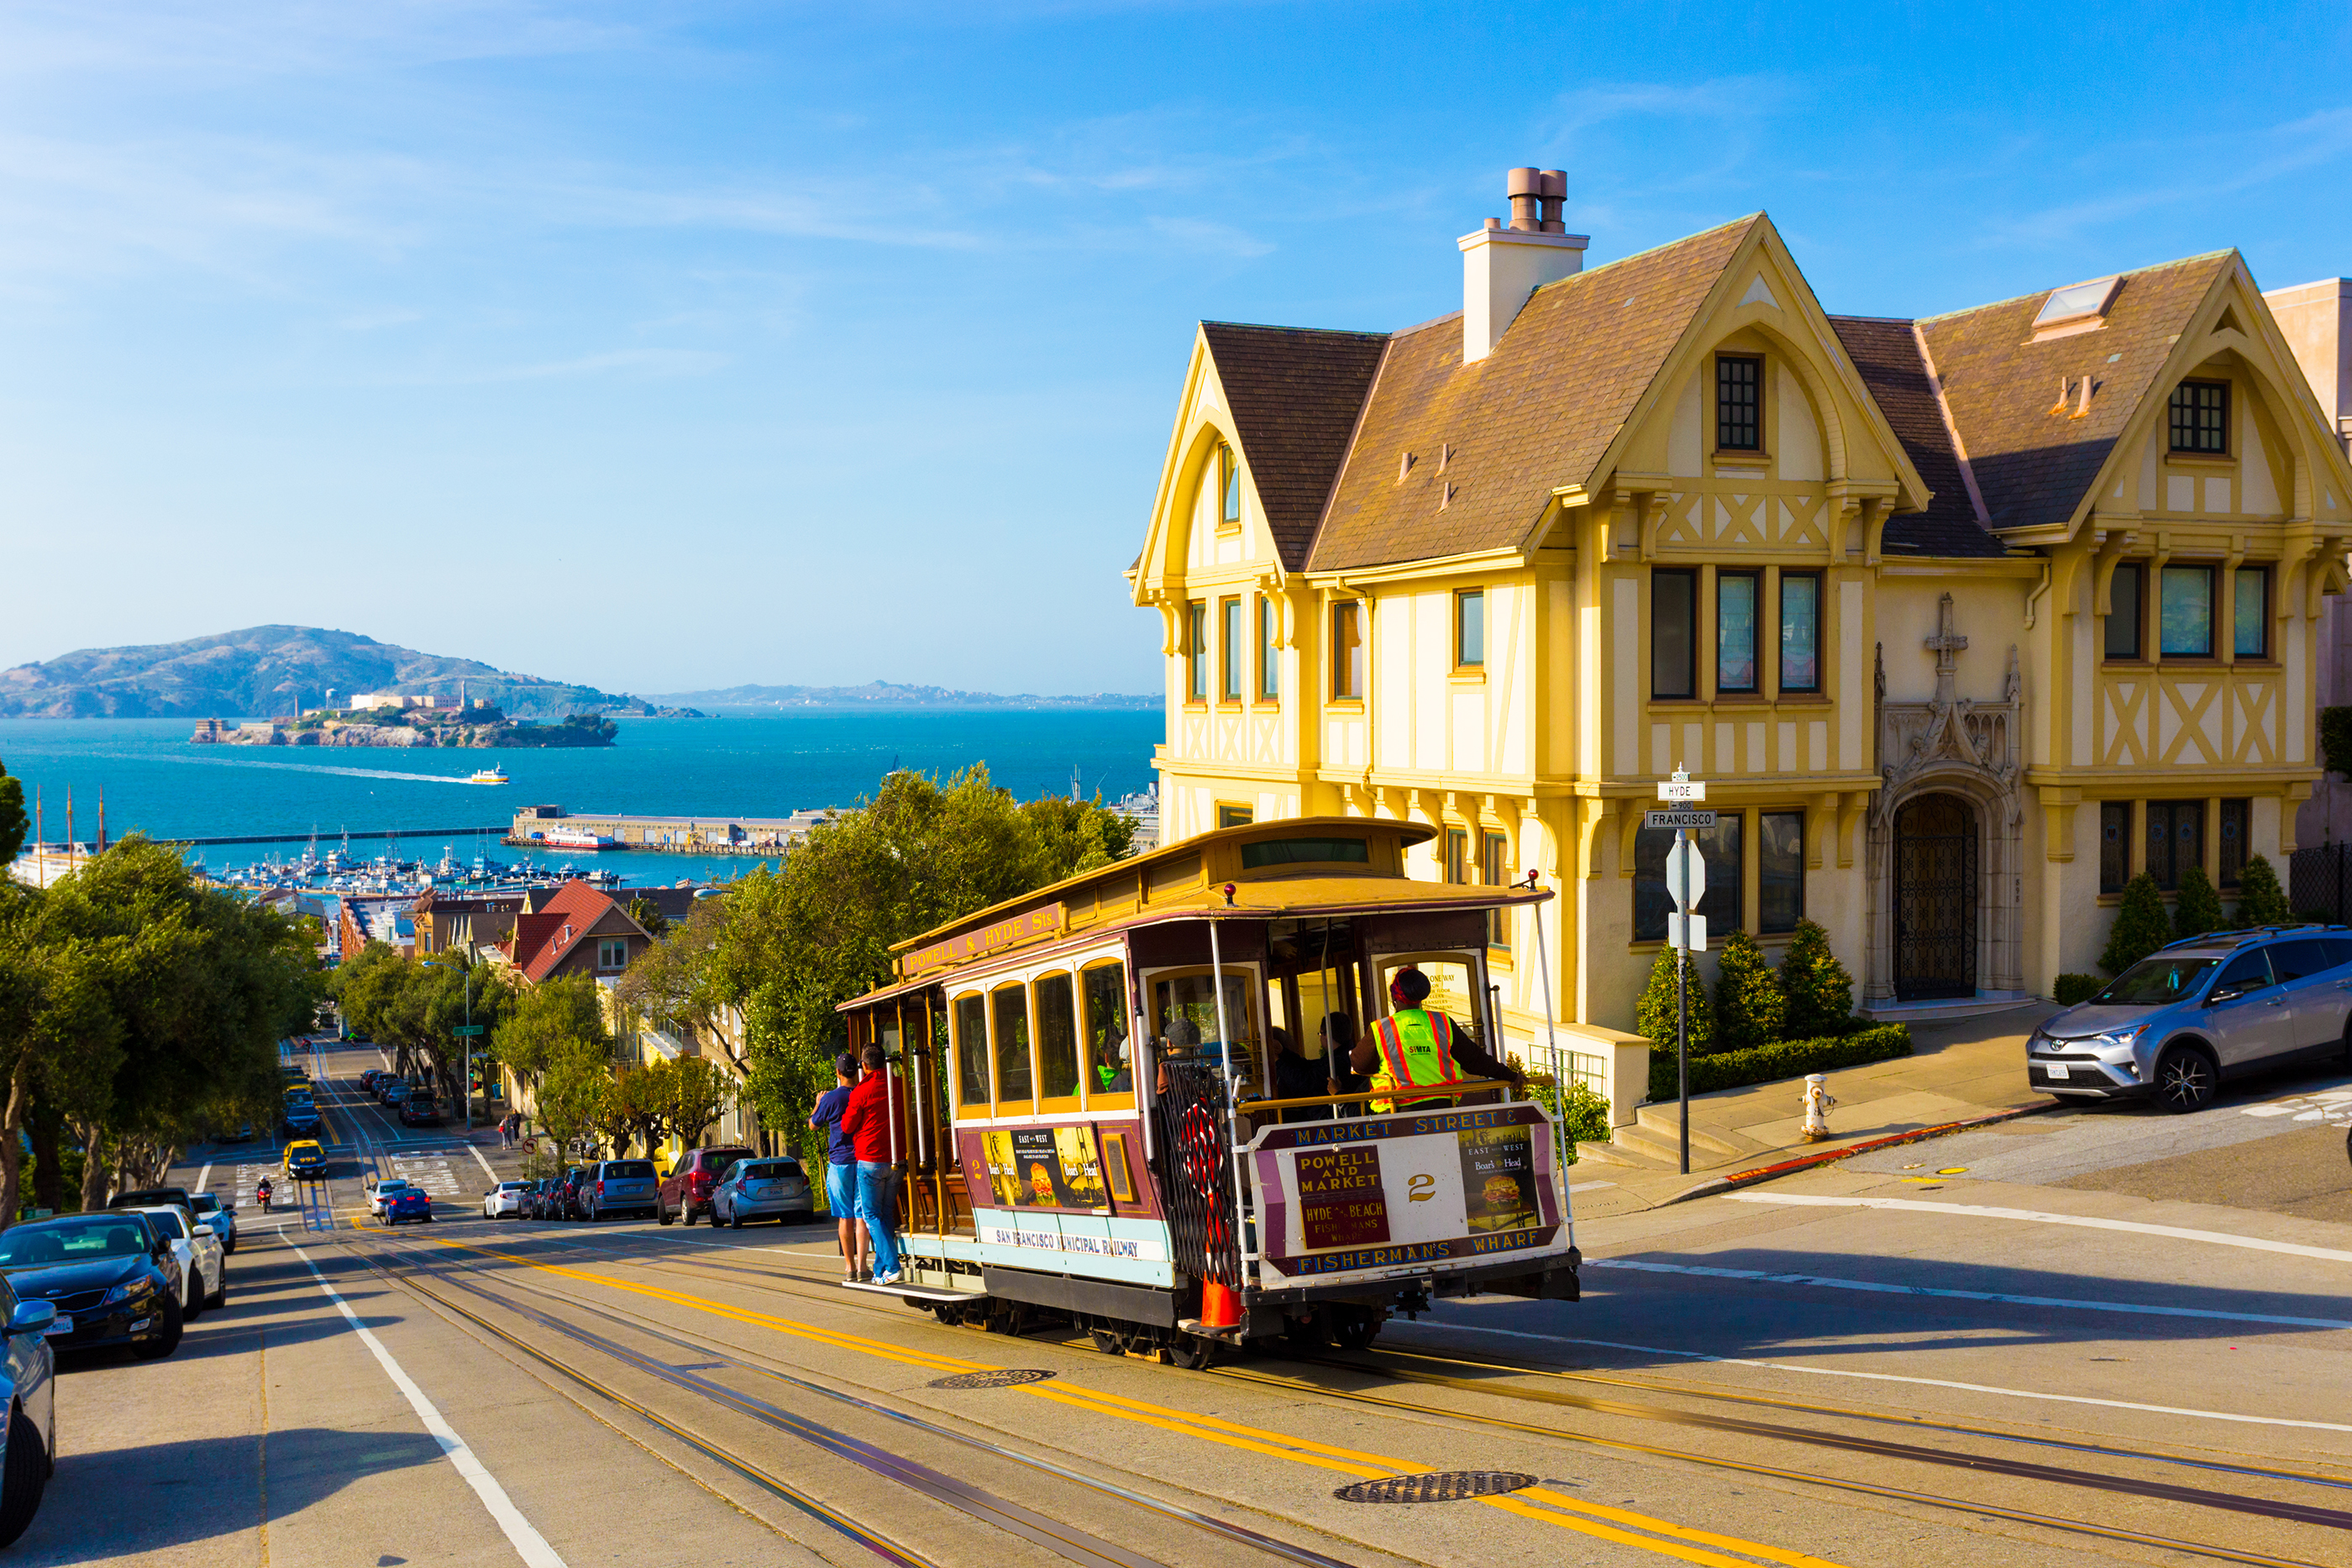 Combined scenic view of San Francisco Bay with Alcatraz, cable car, Victorian houses, typical iconic siteseeing landmarks and tourist attractions of the city